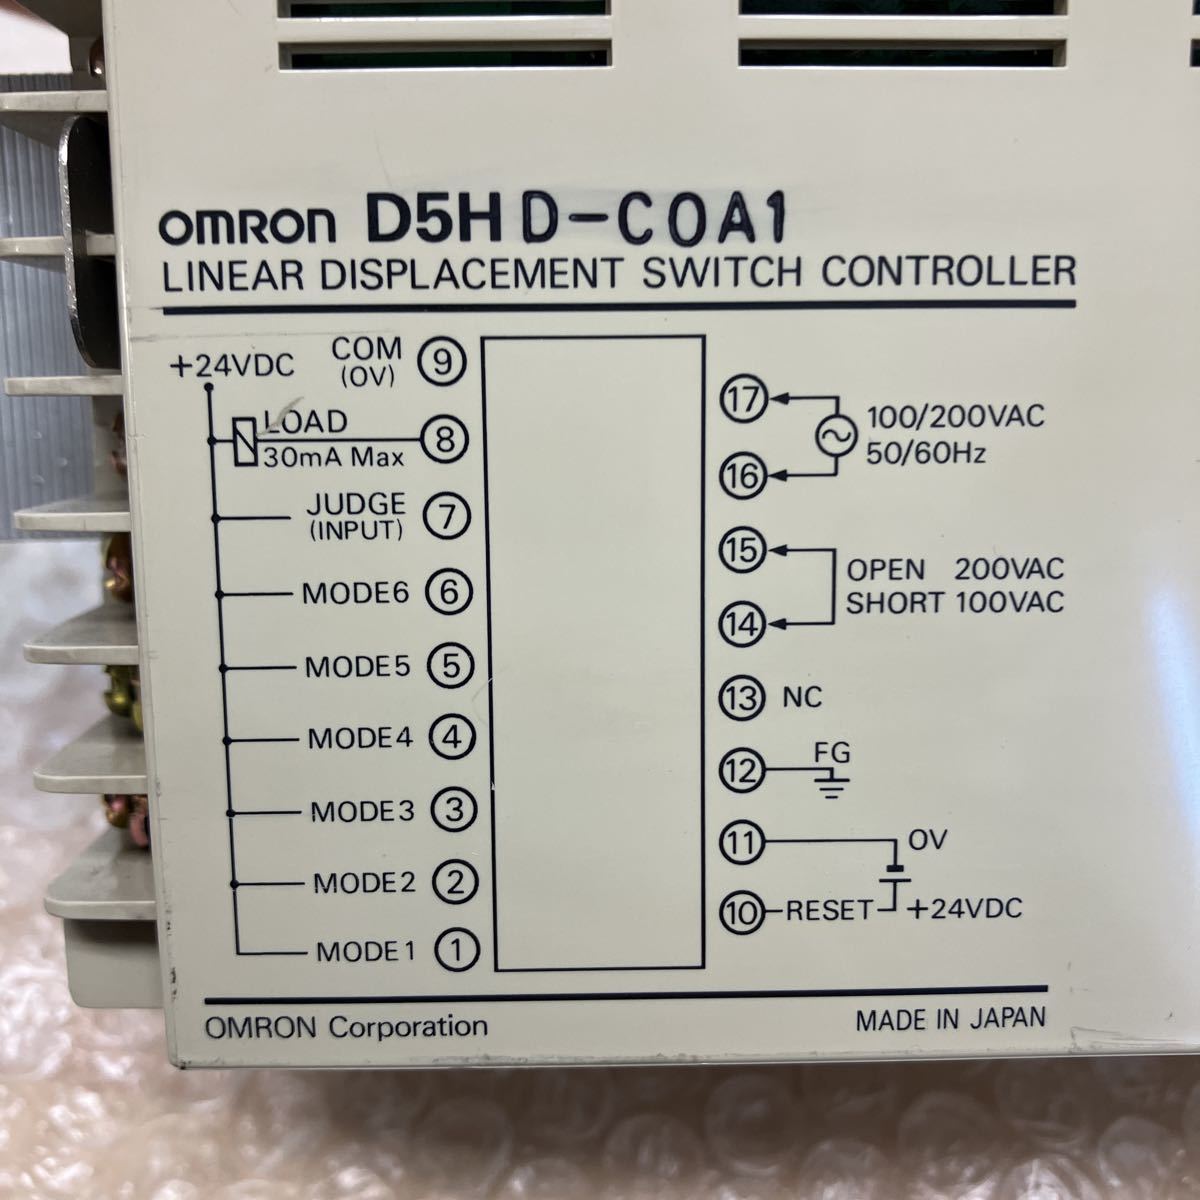 OMRON　オムロン　D5H　D-COA1　LINEAR DISPLACEMENT SWITCH CONTROLLER　ジャンク品　部品取り　O-871_画像5